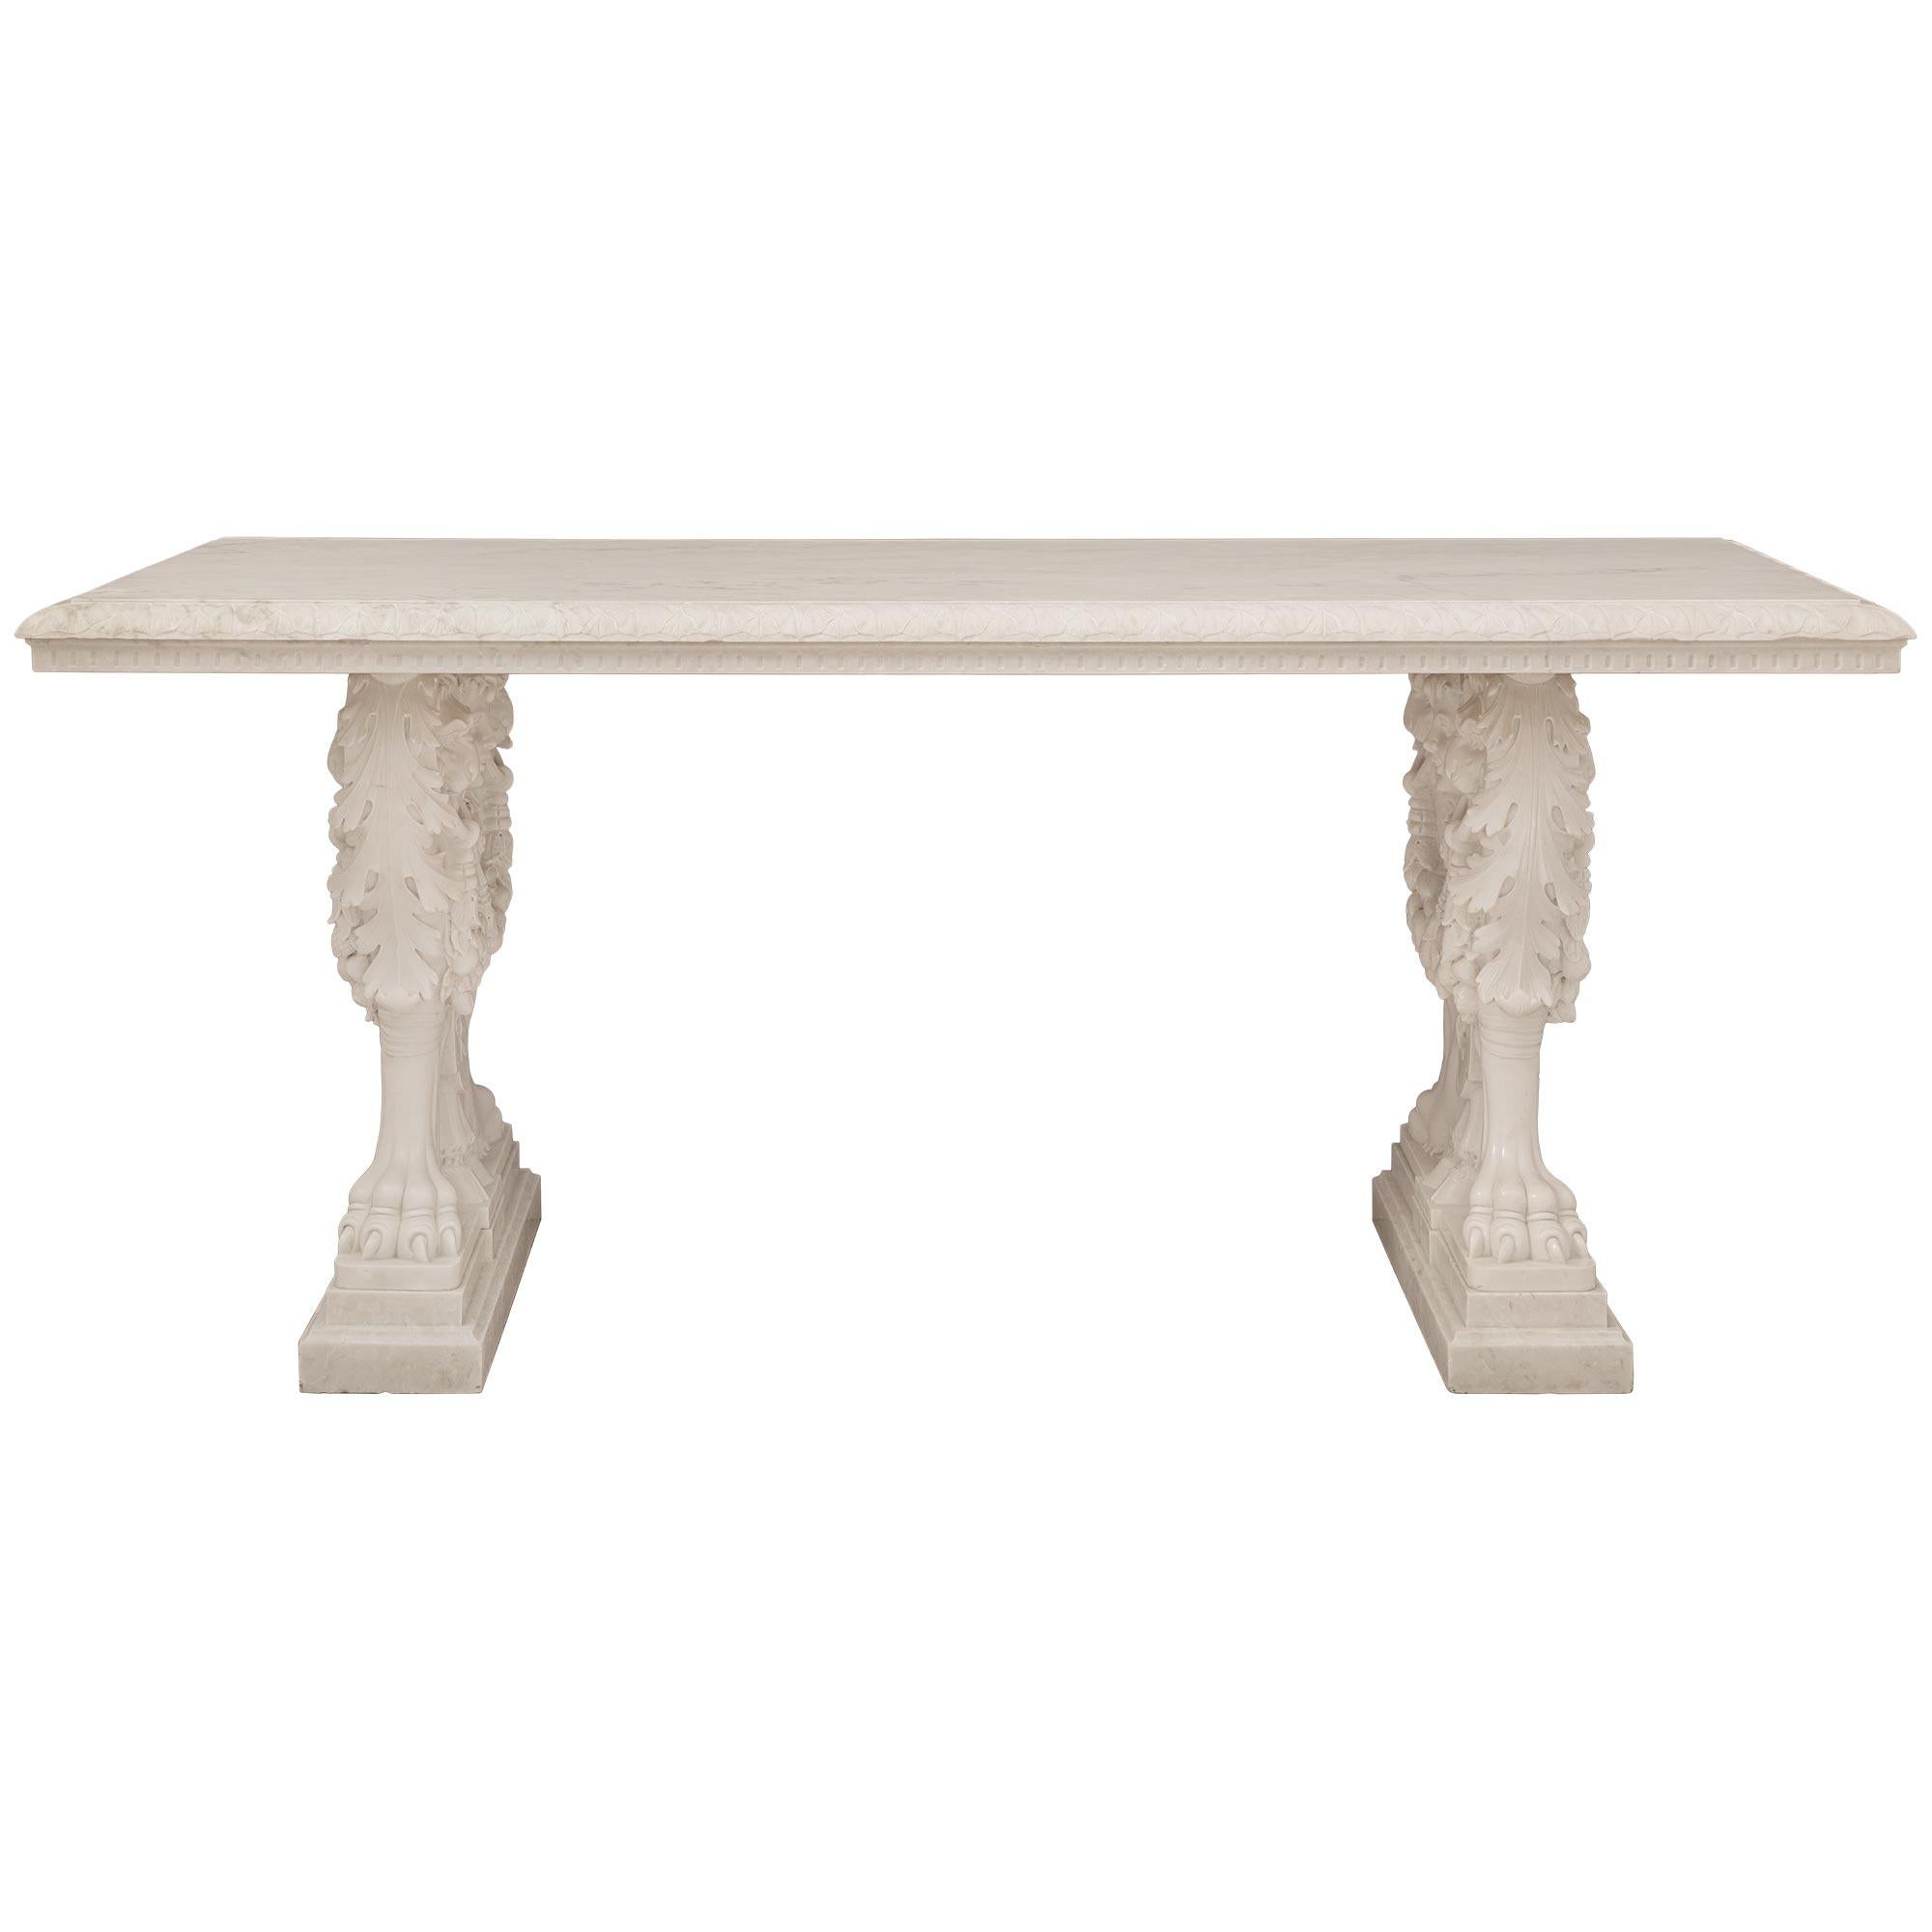 Italian 19th Century Neo-Classical St. White Carrara Marble Center Table For Sale 4